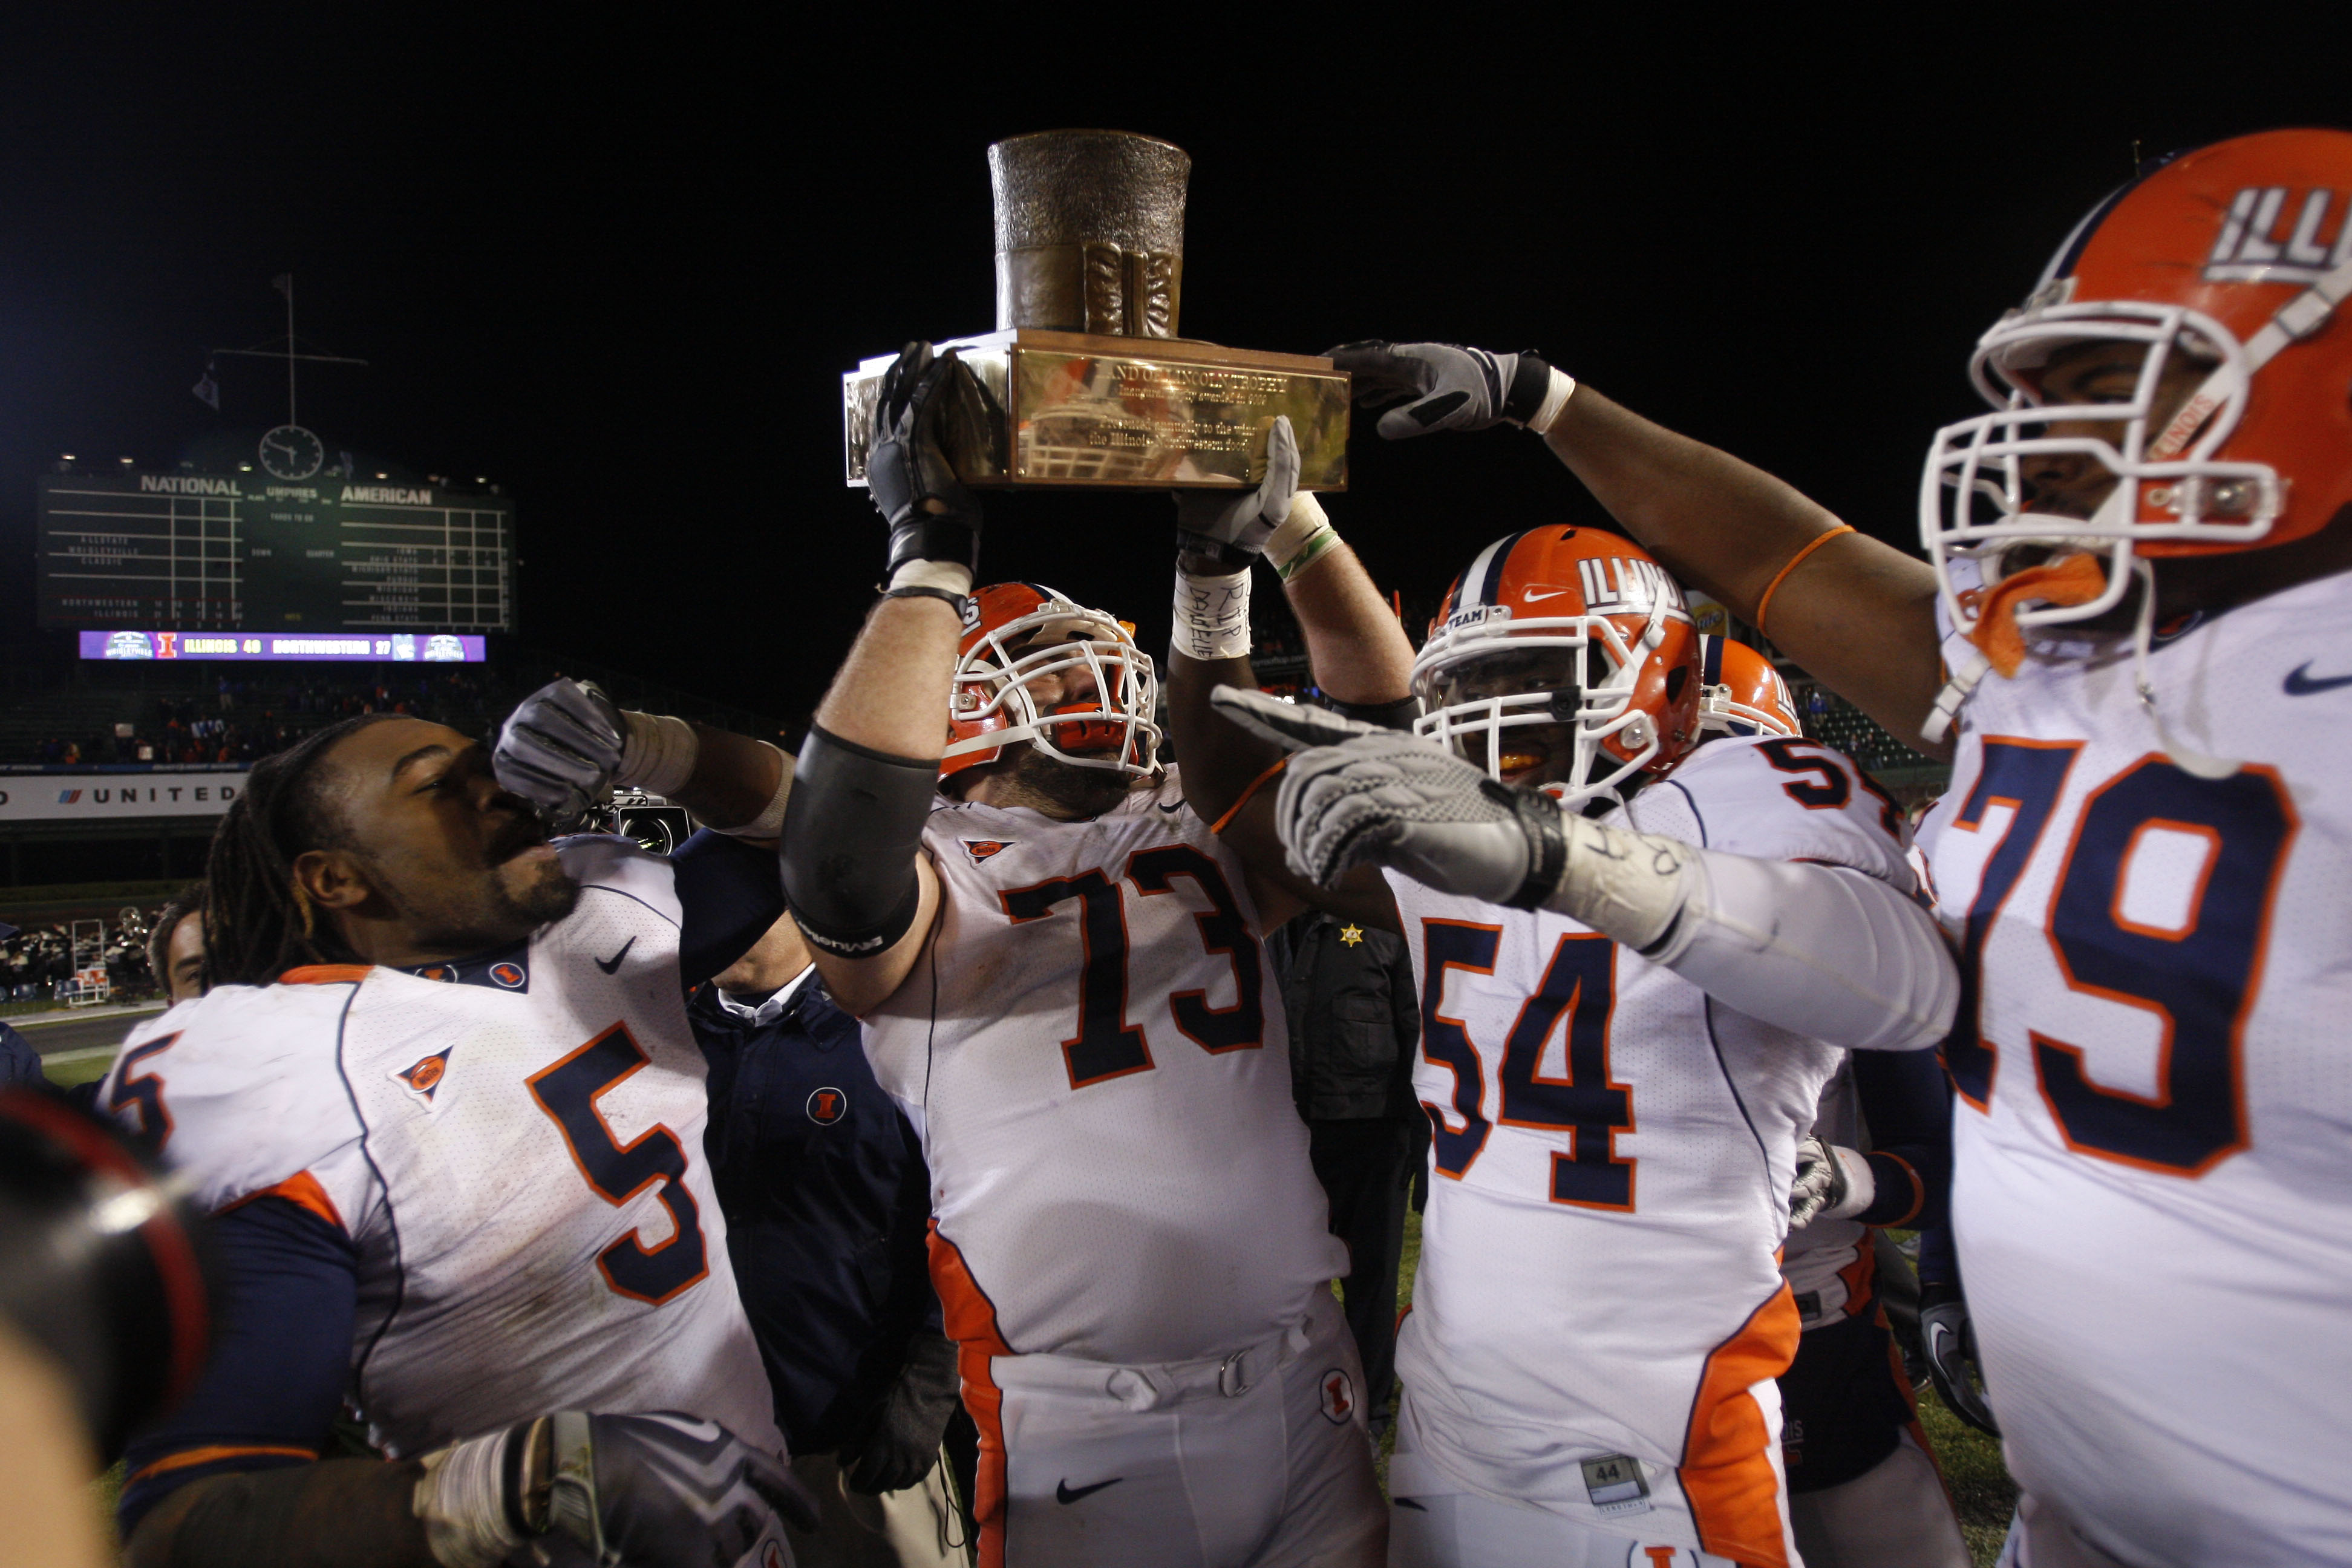 Nov 20, 2010; Chicago, IL, USA; Illinois Fighting Illini players including Jack Cornell (73) and Mikel Leshoure (5) and Justin Staples (54) and Craig Wilson (79) celebrate with the Land of Lincoln trophy after defeating the Northwestern Wildcats 48-27 at Wrigley Field. Mandatory Credit: Jerry Lai-US PRESSWIRE ORIG FILE ID: 20101120_jel_sl8_039.jpg